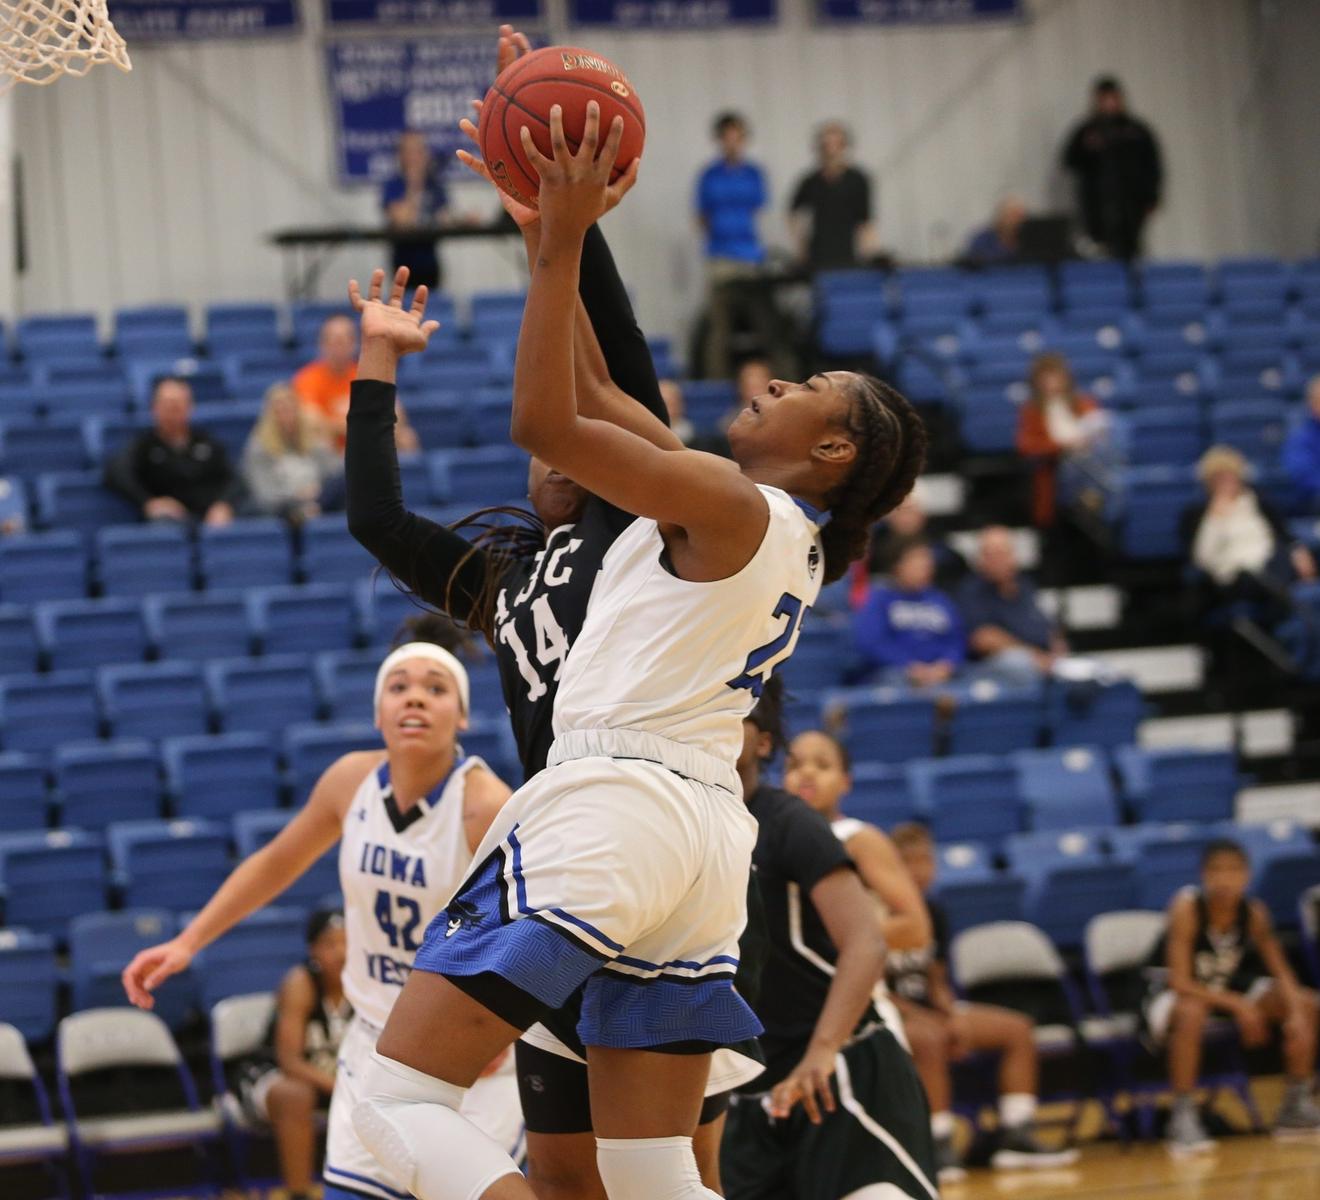 Sophomore Jazza Johns lead four Reivers in double-figures with 26 points and 13 rebounds  as #18 Iowa Western outscored Arkansas Baptist 90-67.